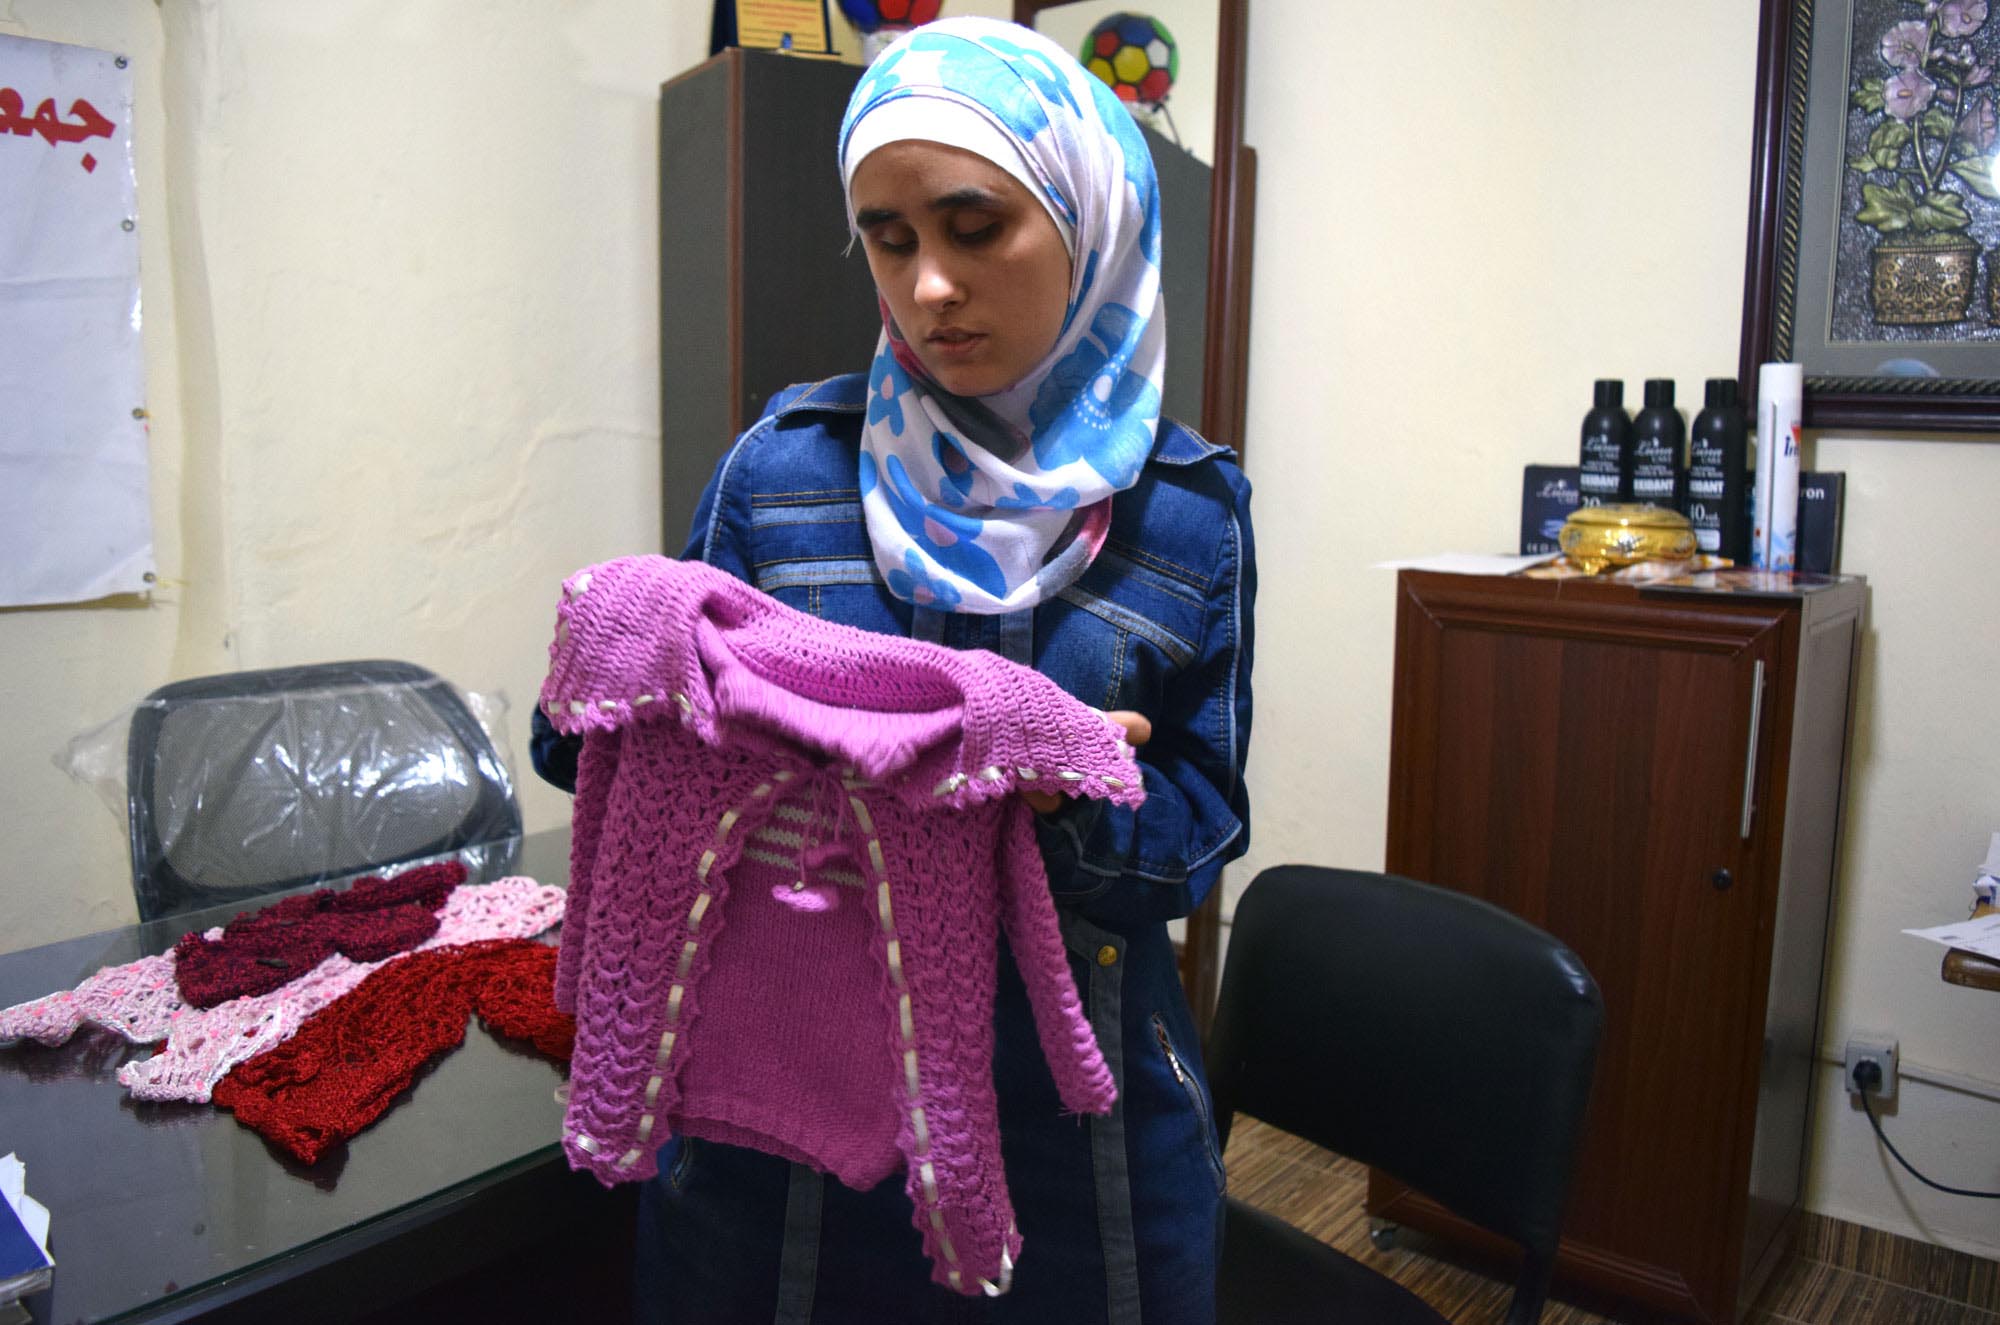 Syrian refugee education courses in sewing and knitting help teens learn job skills.